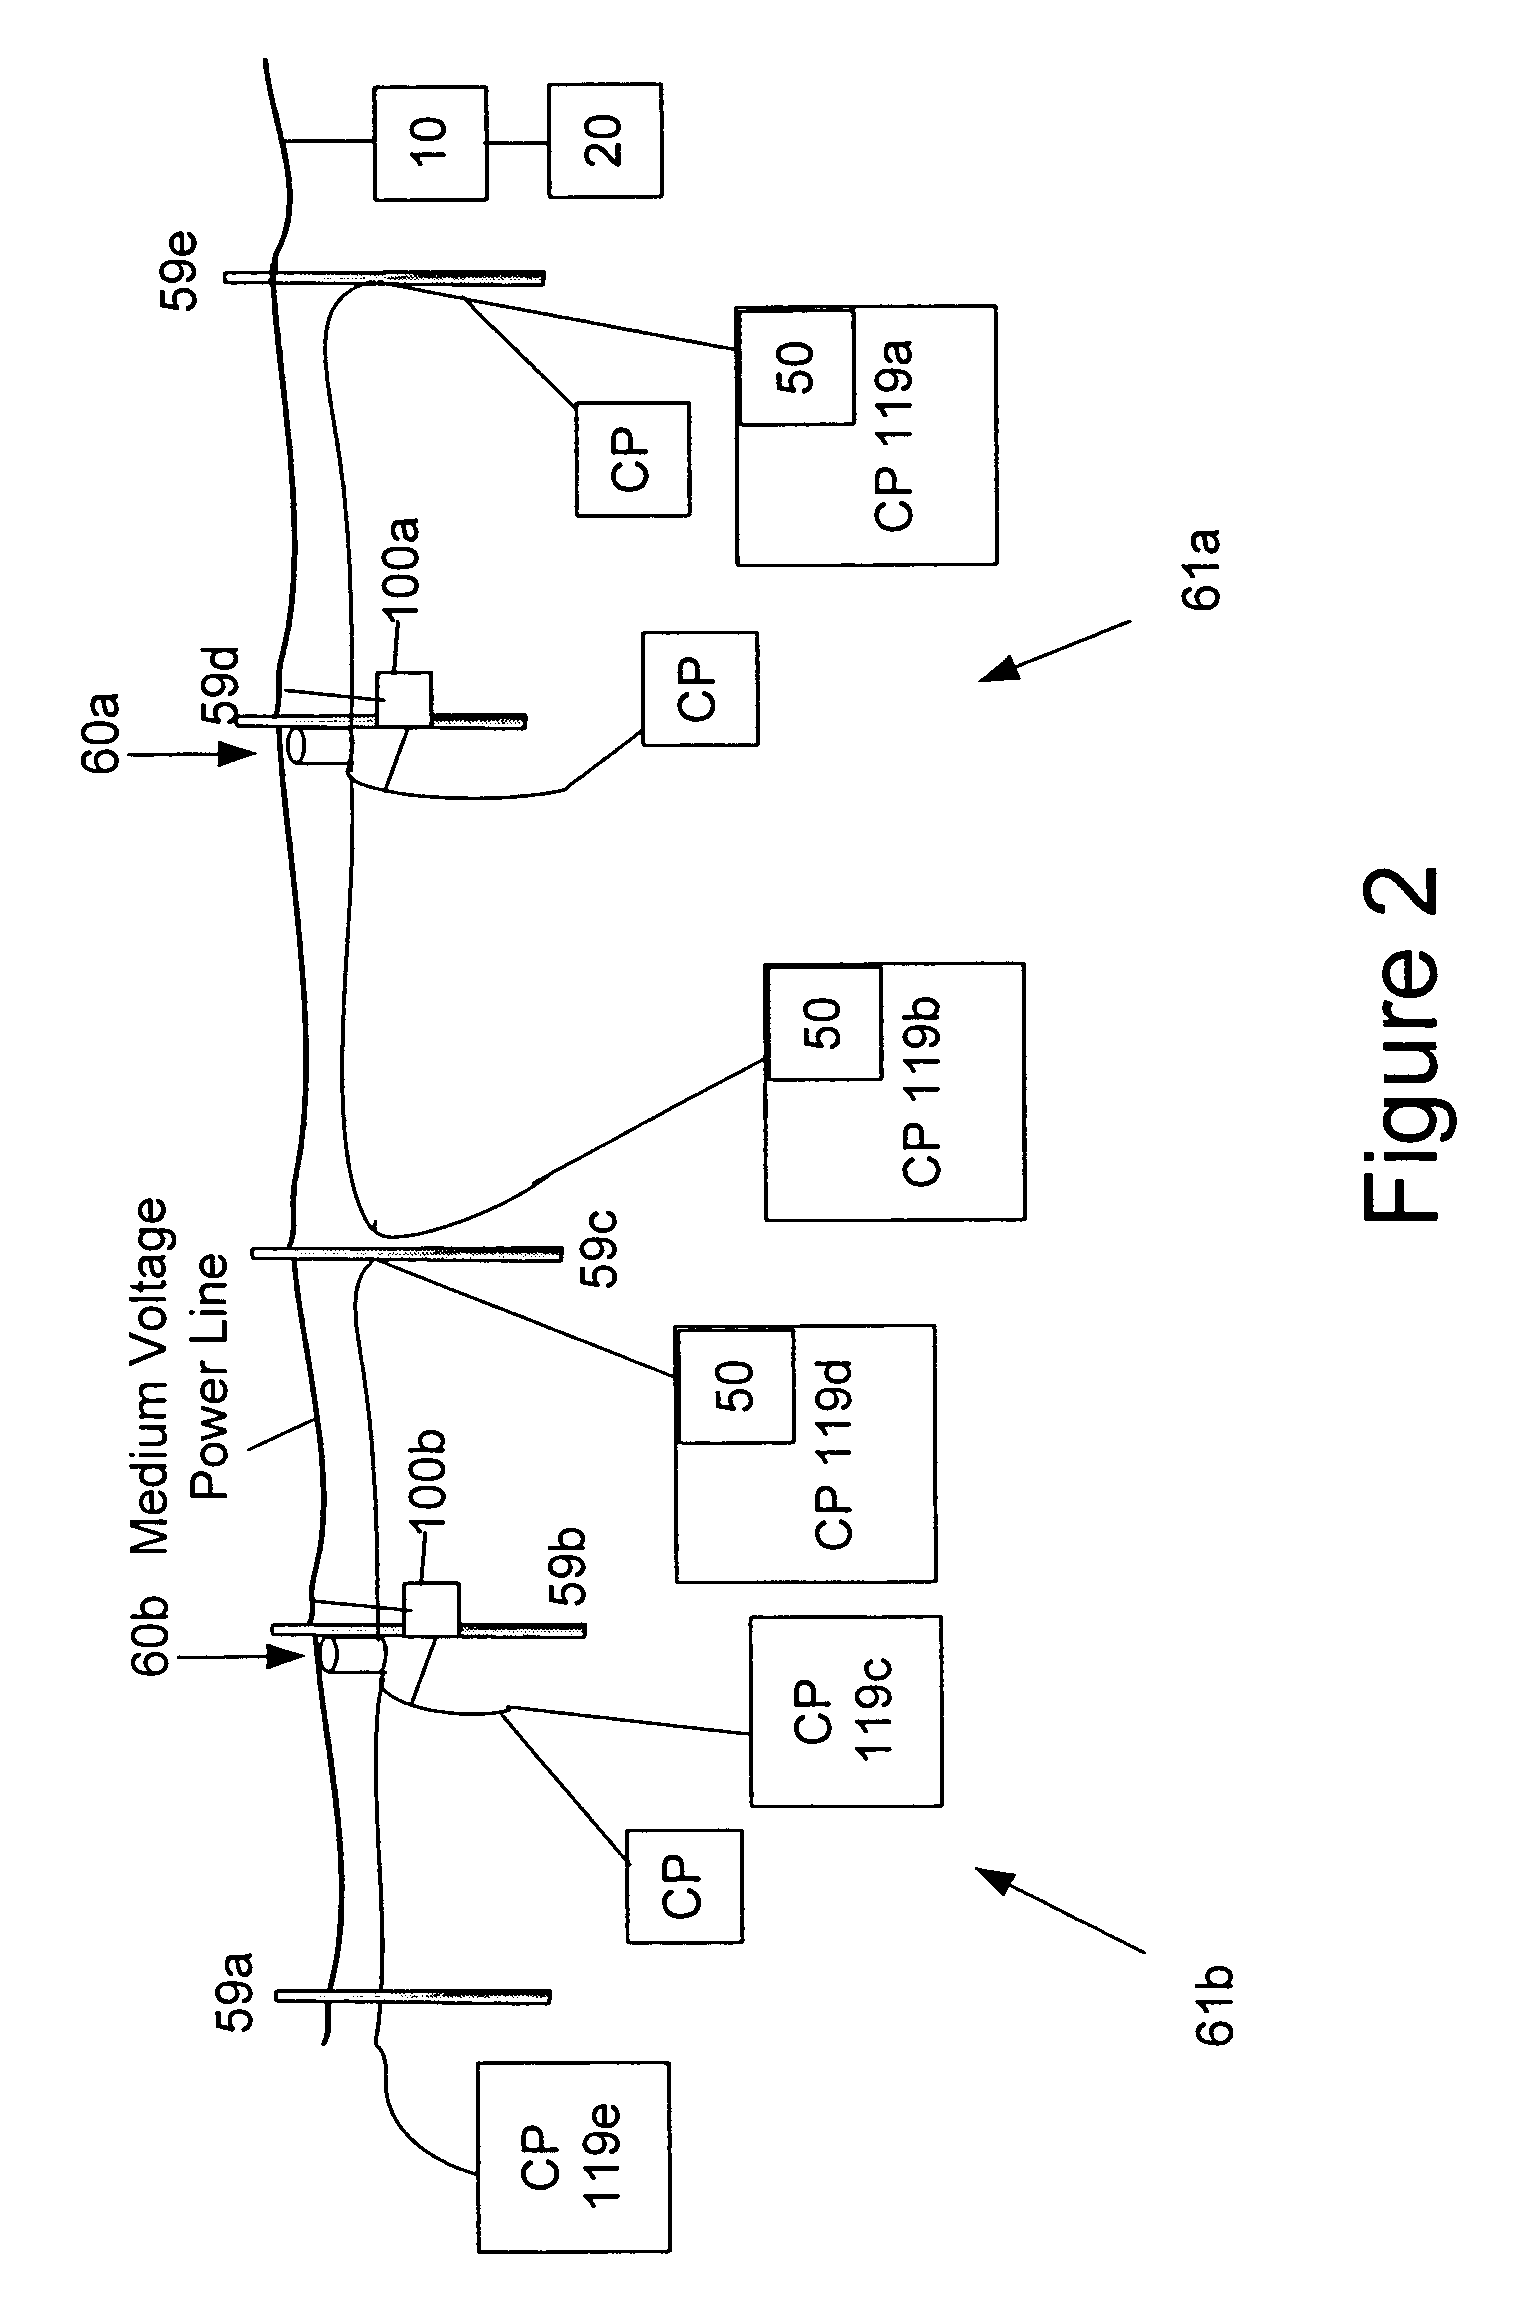 Multi-subnet power line communications system and method